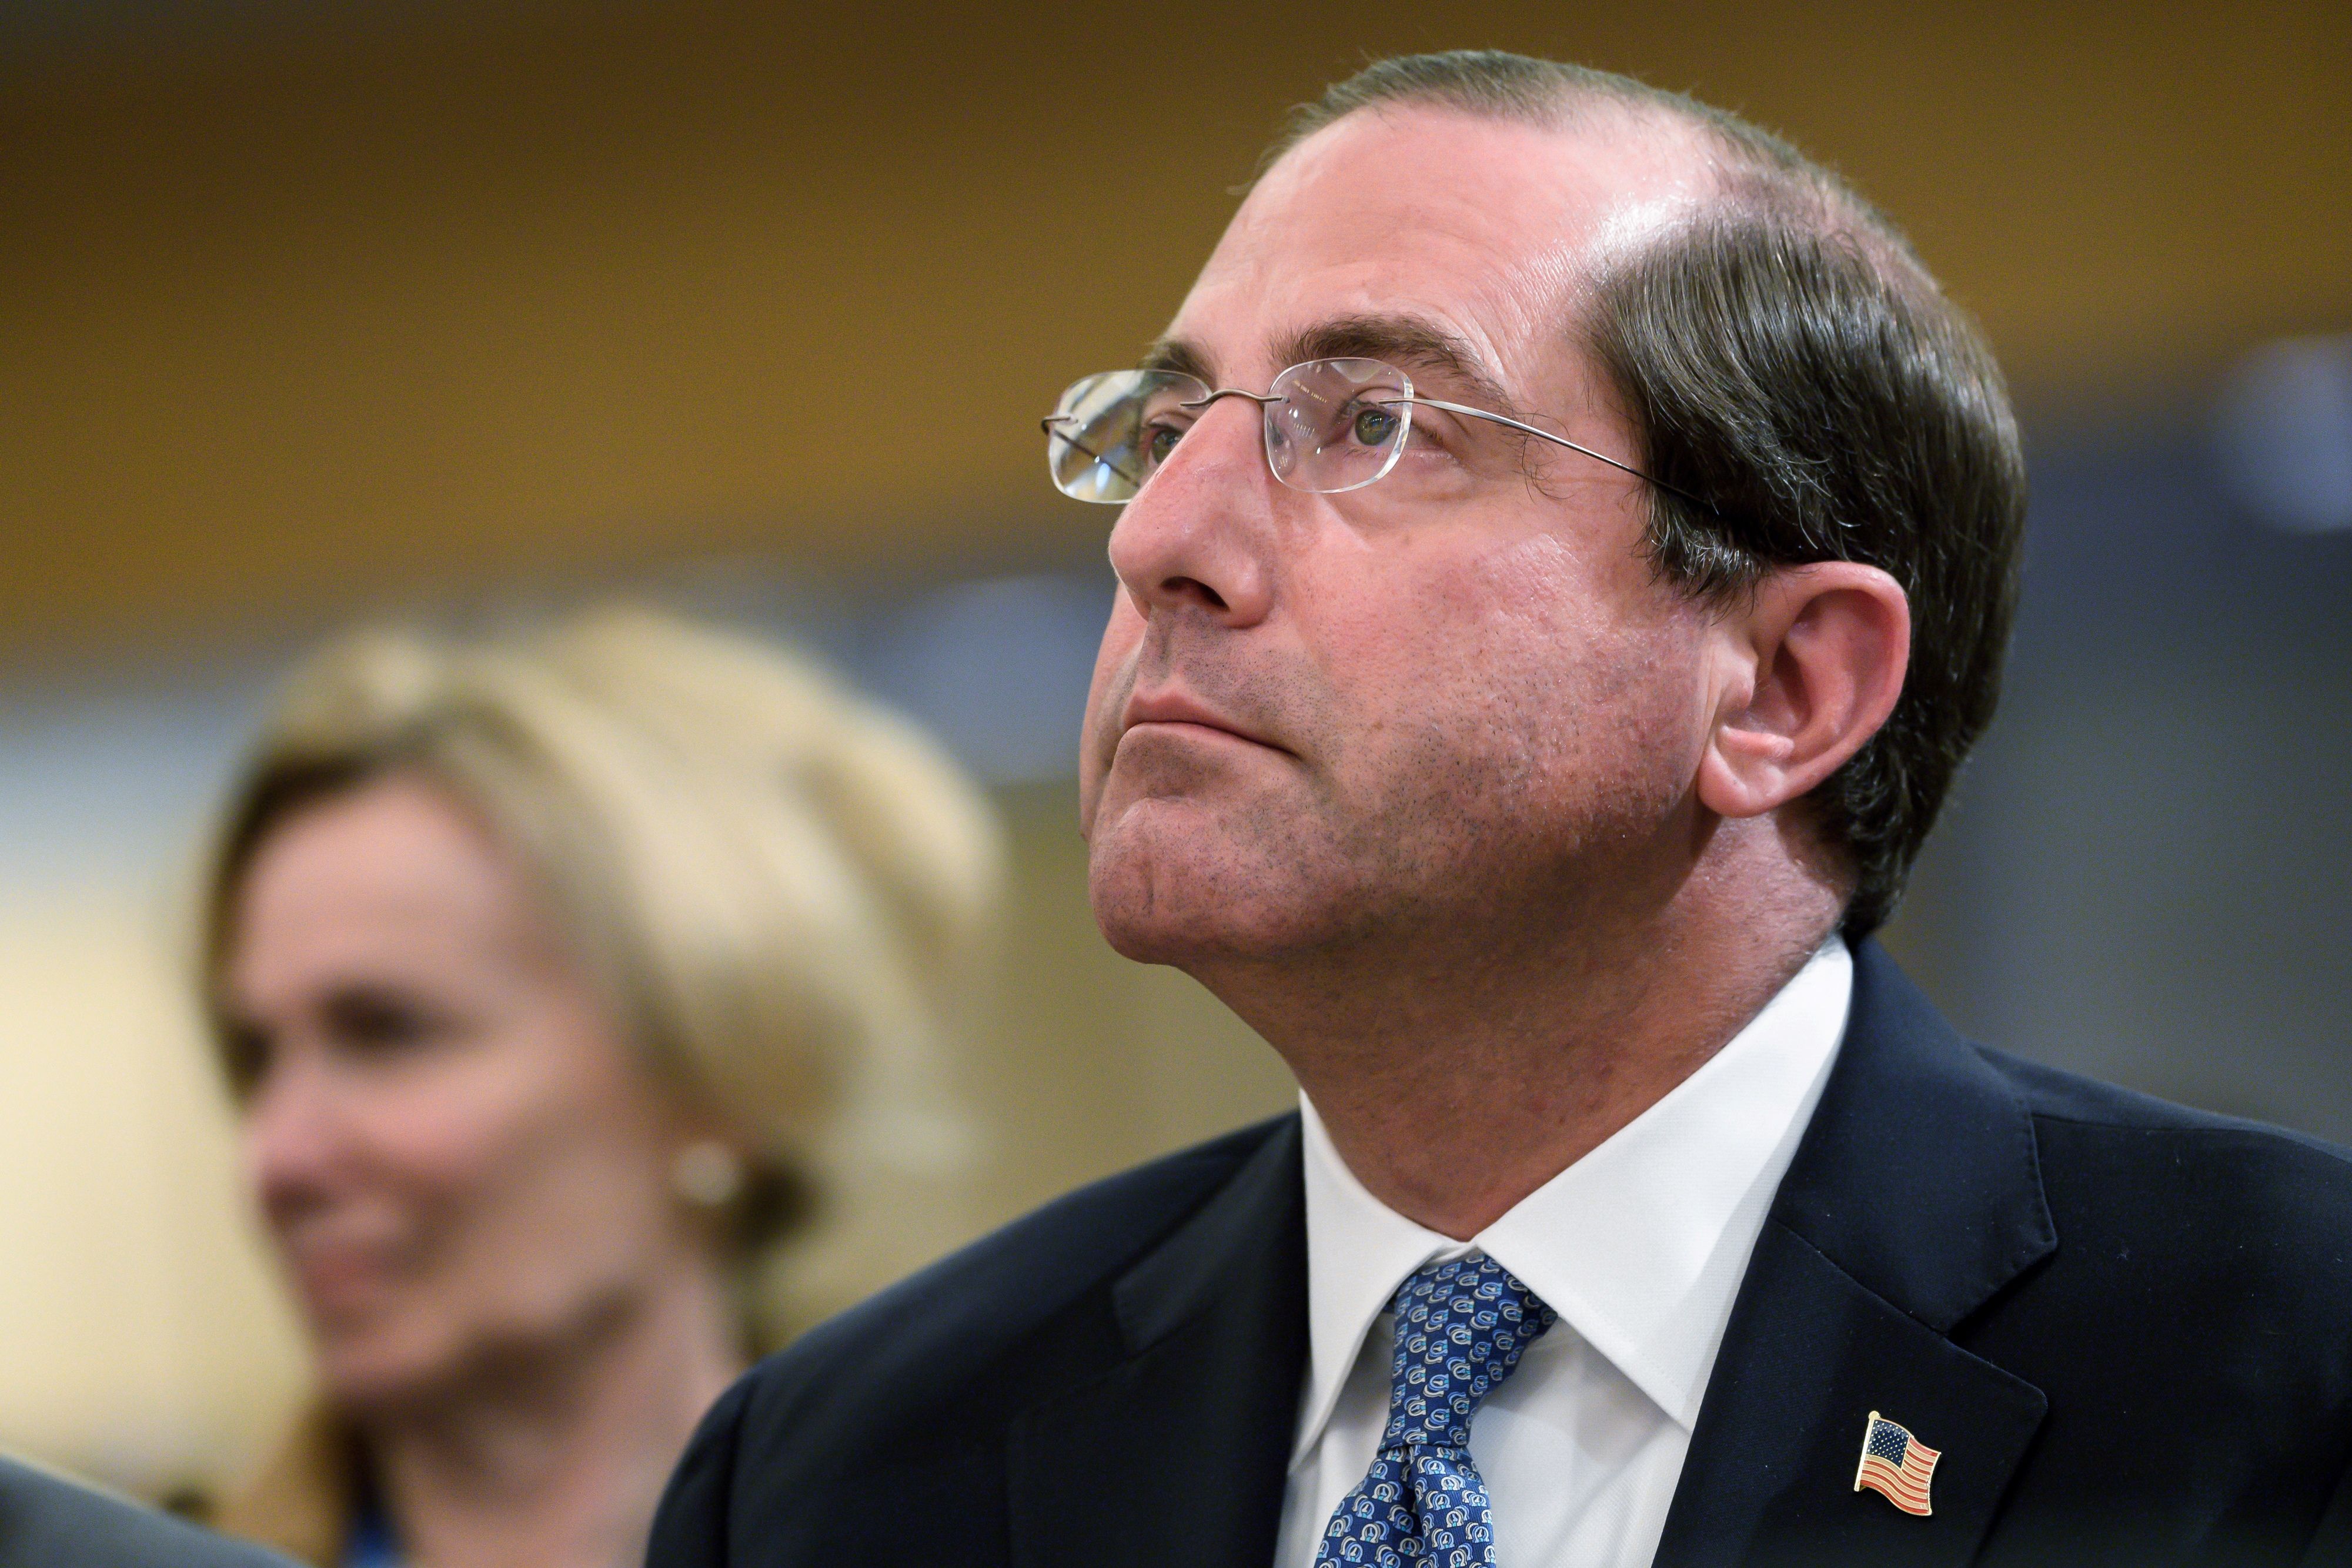 US Secretary of Health Alex Azar attends the opening day of the World health assembly on May 20, 2019 at the United Nations Offices in Geneva. (FABRICE COFFRINI/AFP/Getty Images)